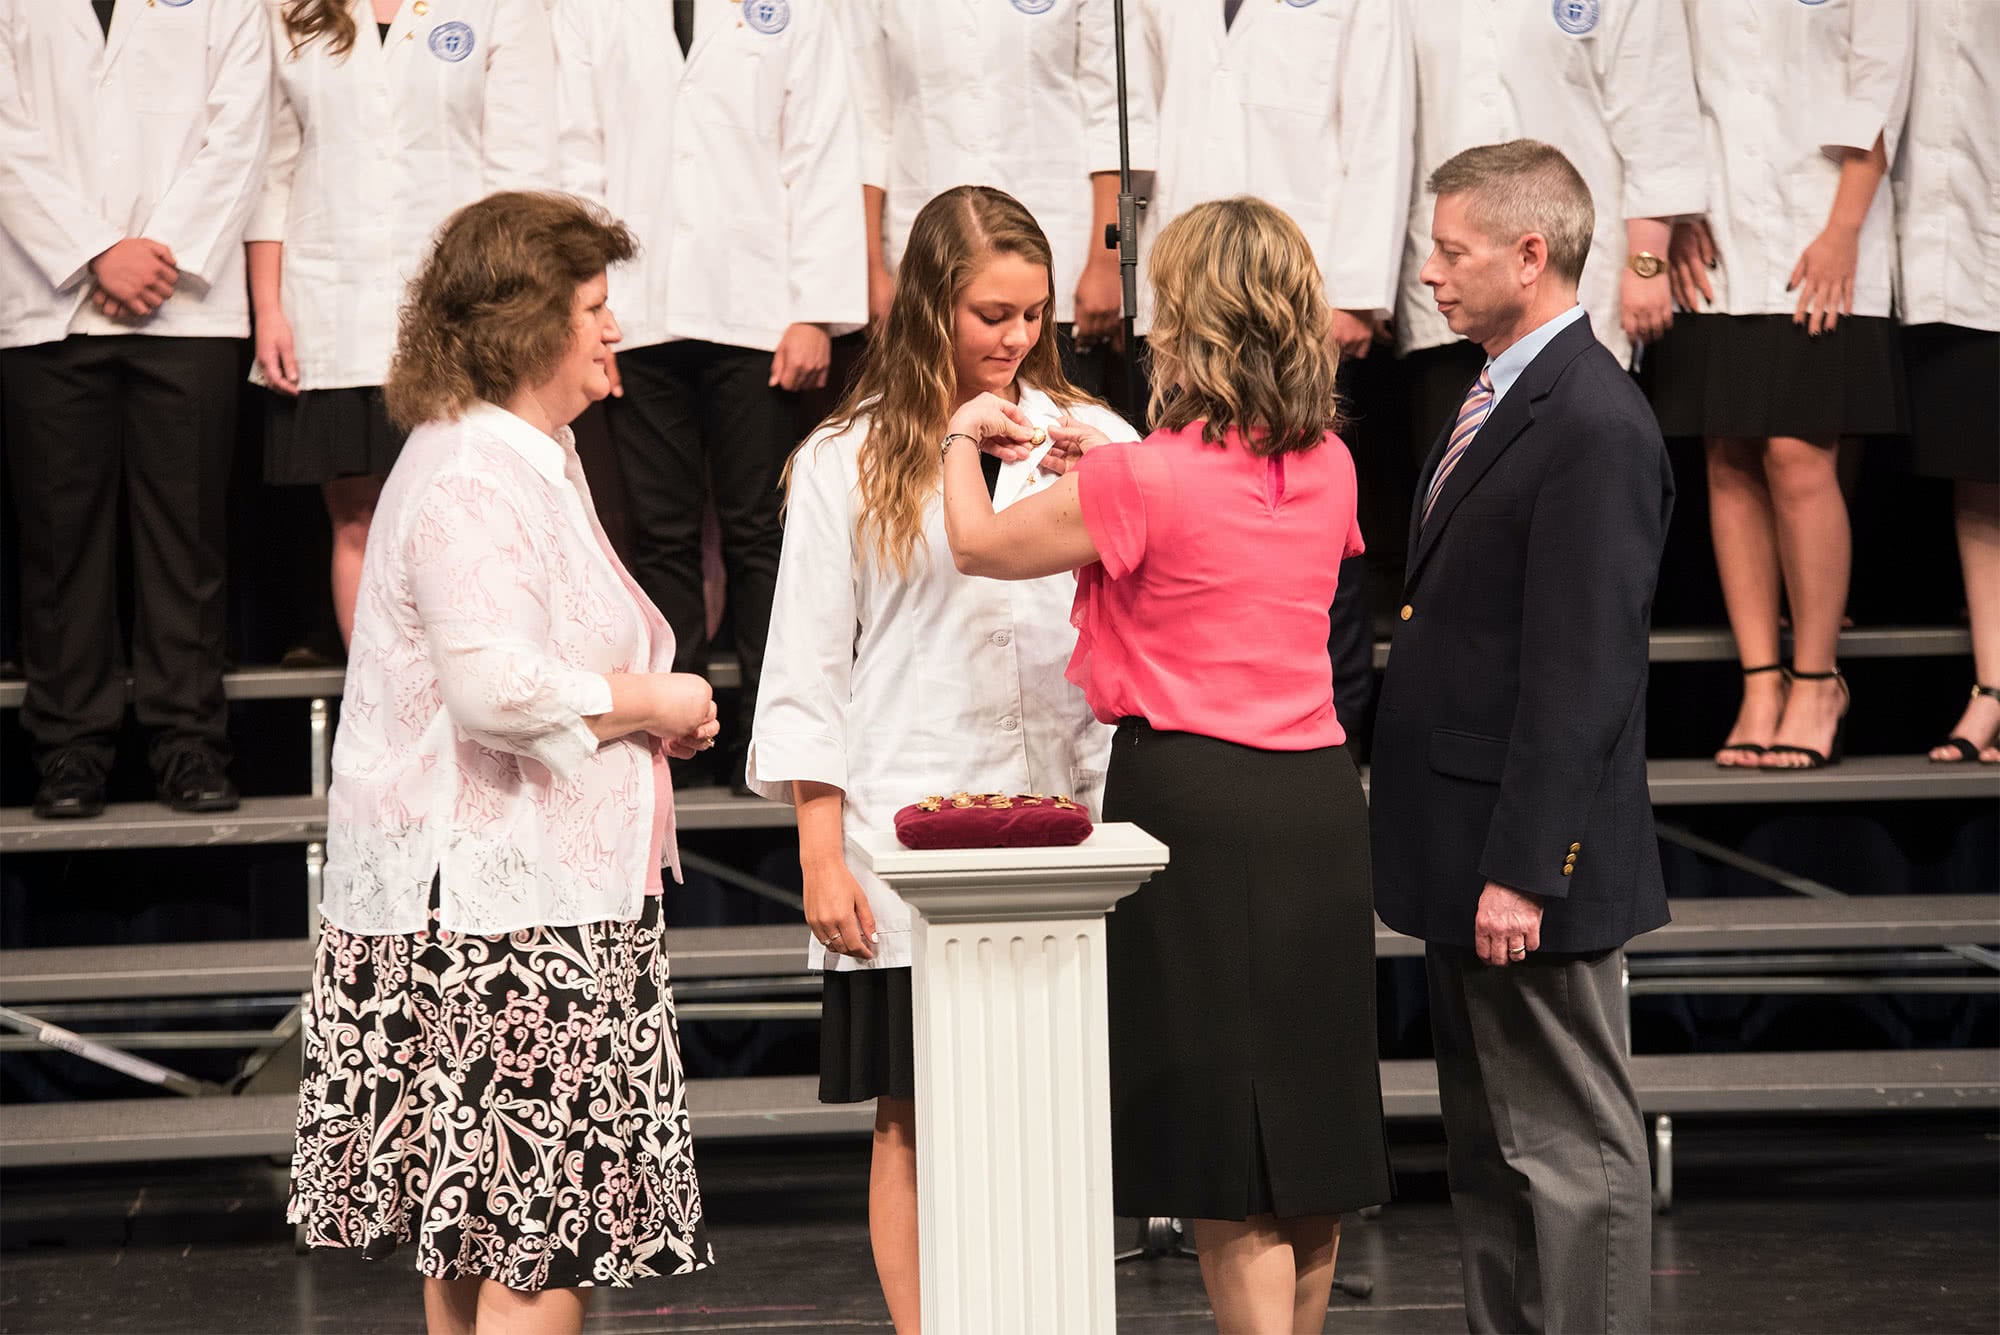 Parents pin their daughter at the Nurses' Pinning Ceremony